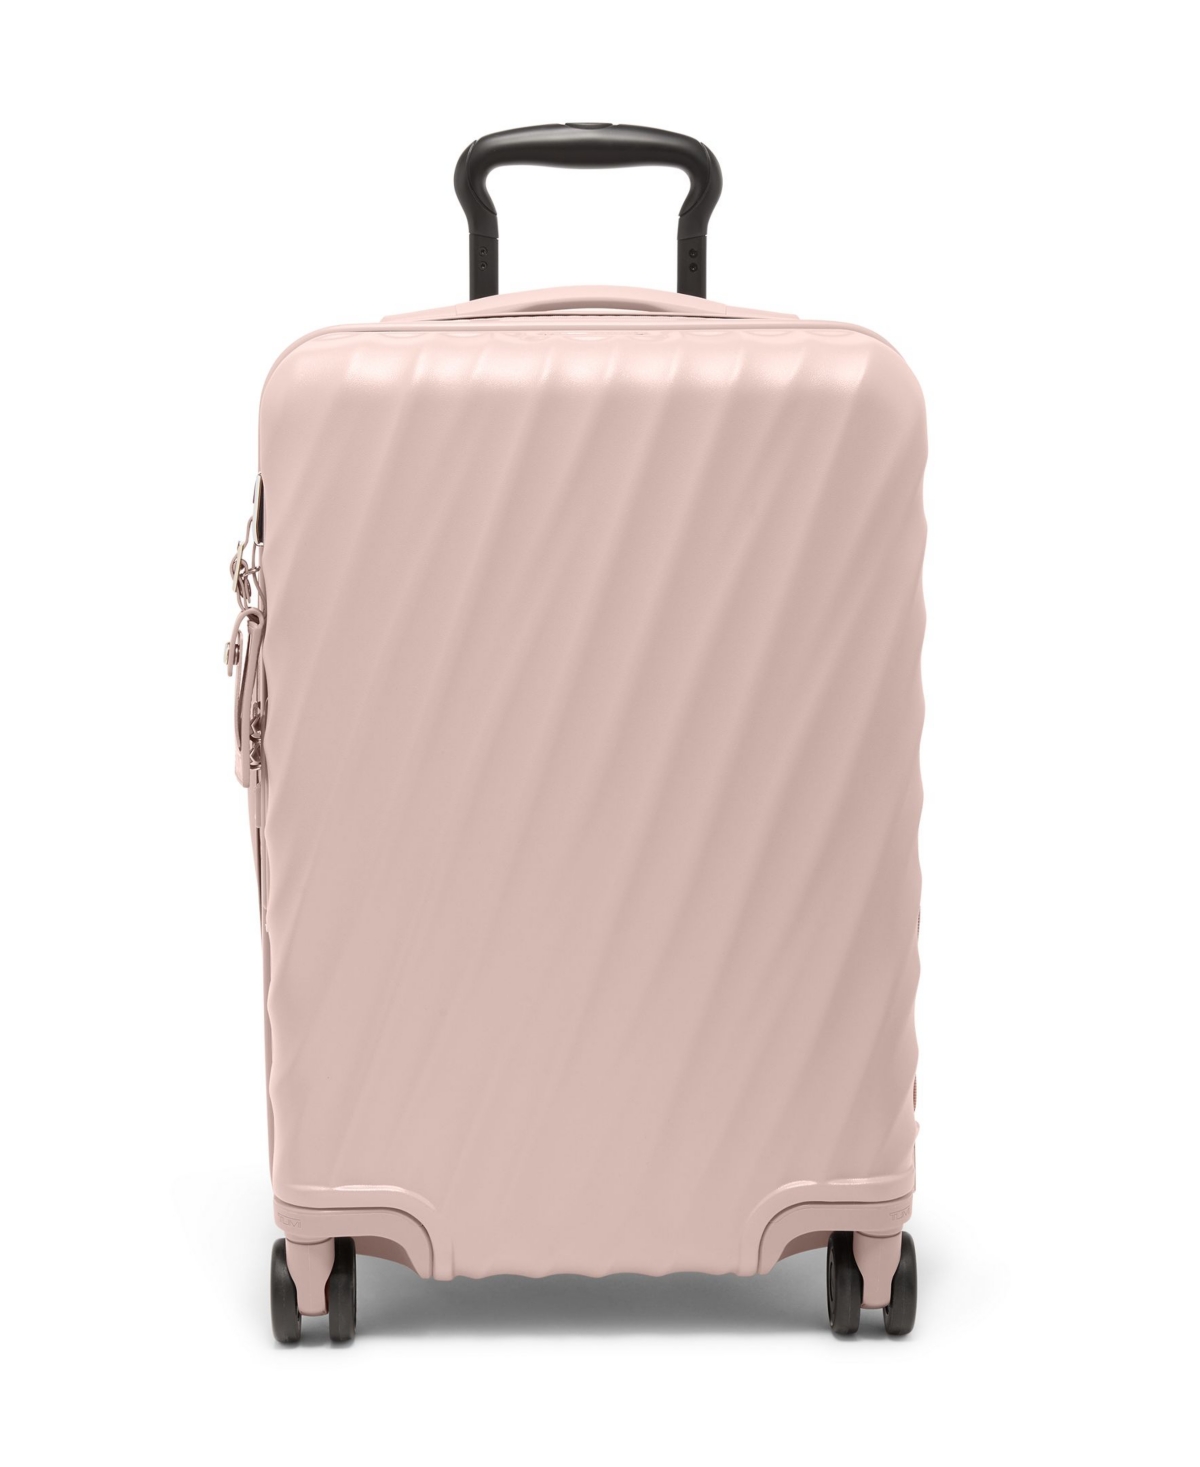 Tumi 19 Degree International Expandable 4 Wheeled Carry-on In Mauve Texture